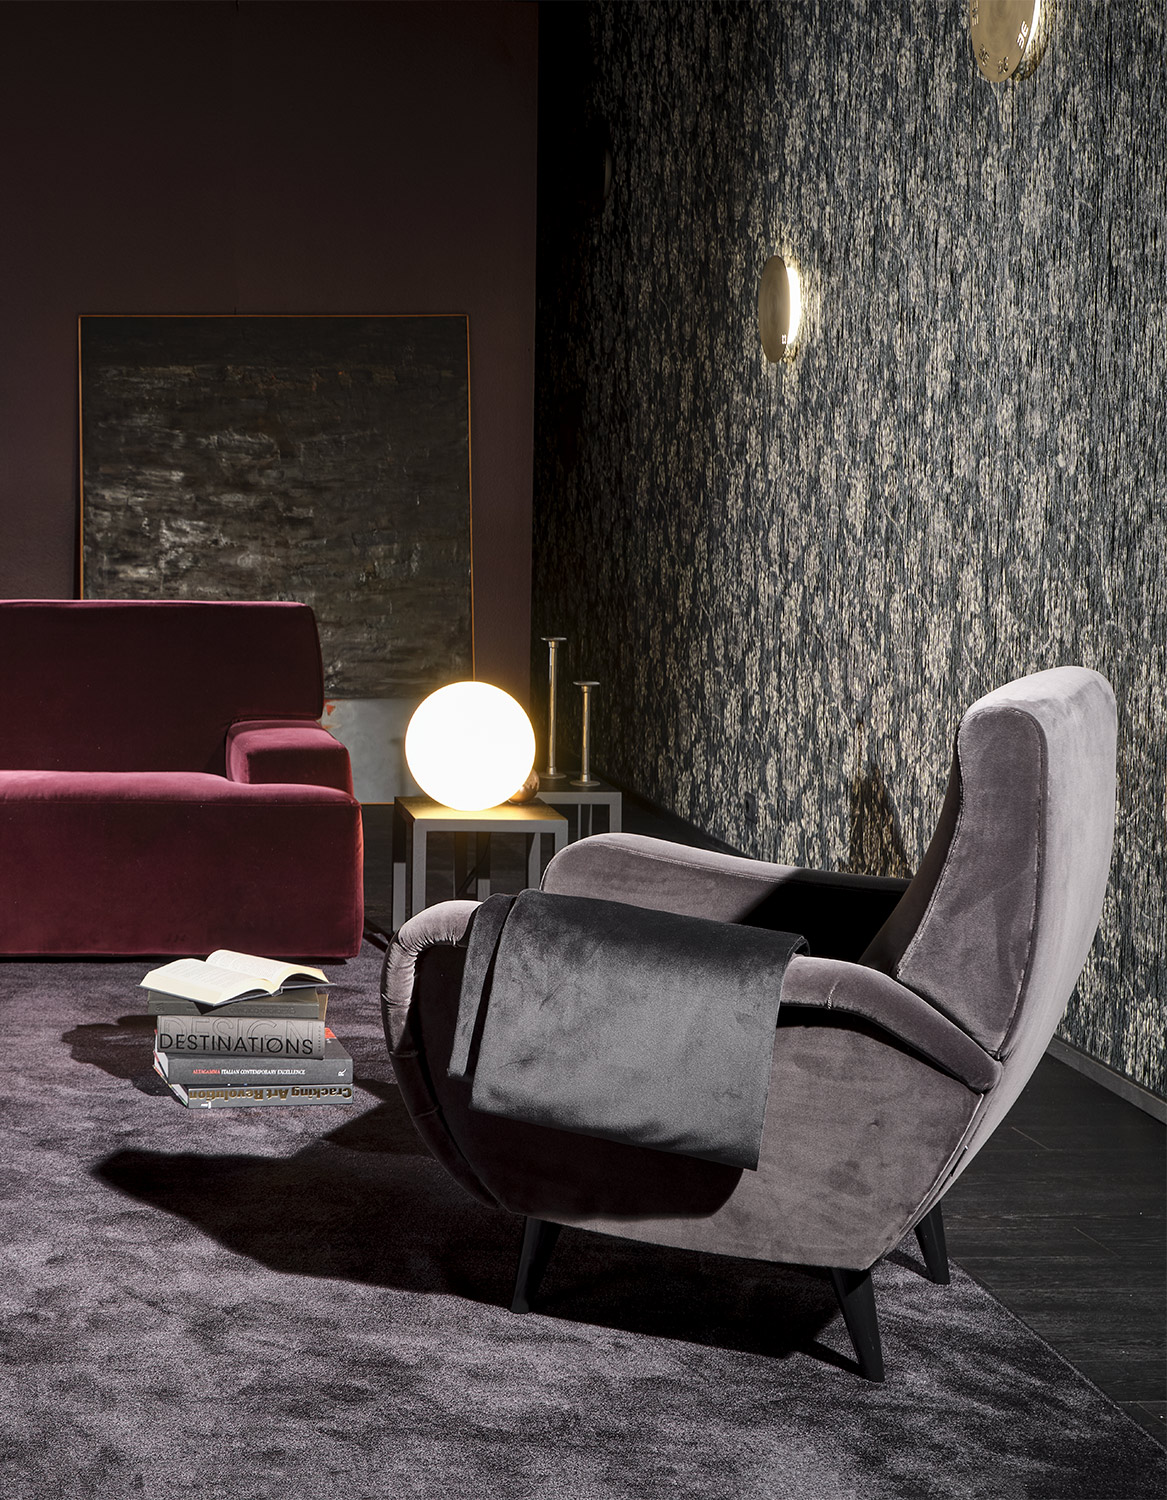 Mussi Eclissi lamp and armchair